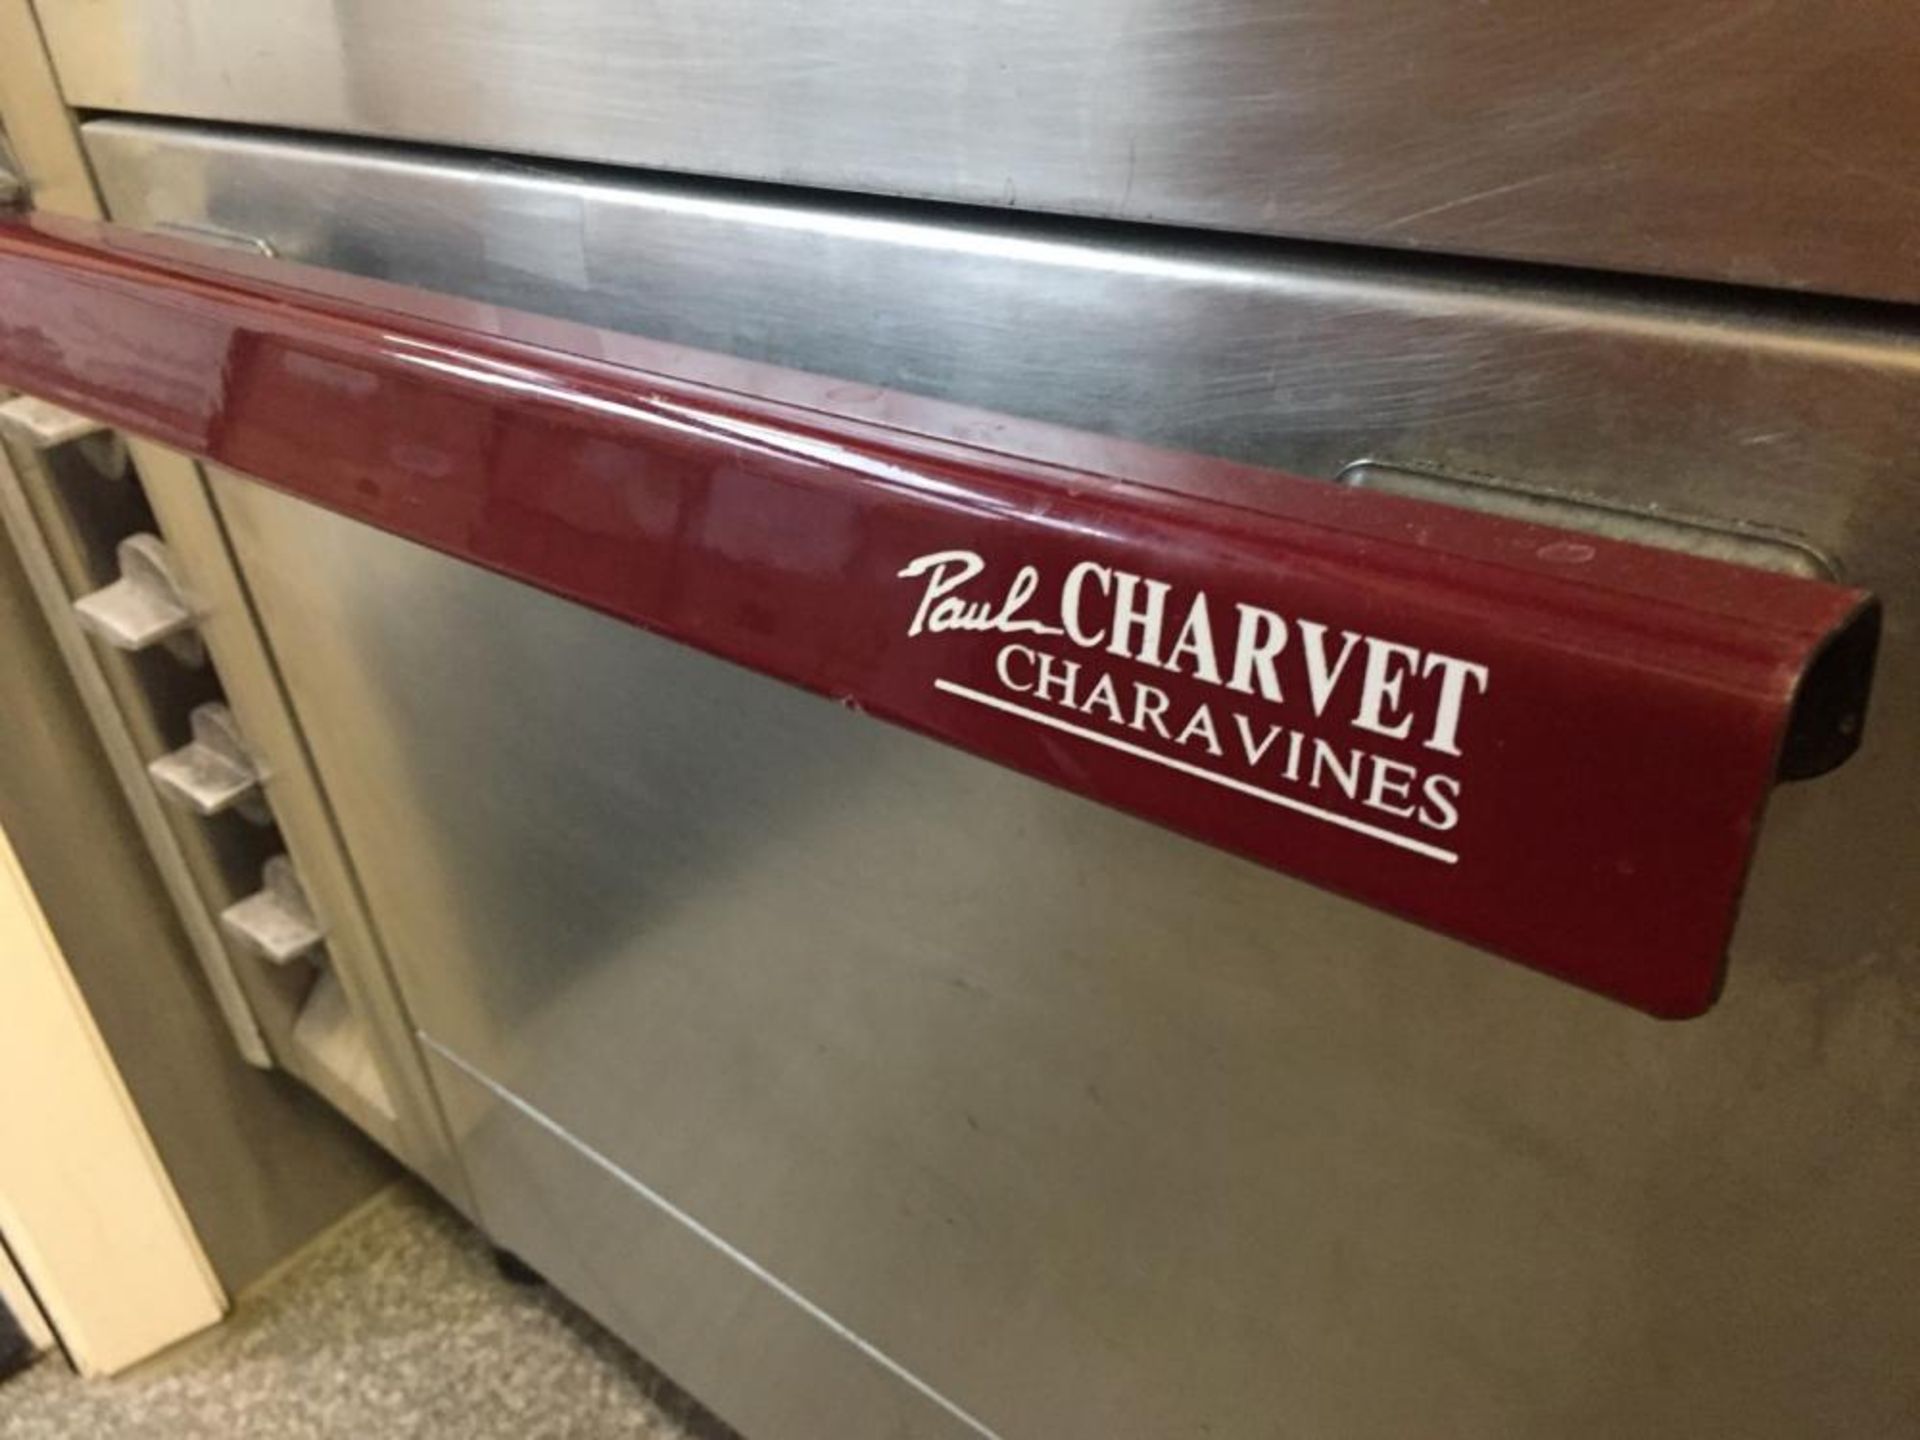 1 x Paul Charvet Charavines Heavy Duty Commercial Oven - Model: Pro 800 - Stainless Steel - Dimensio - Image 3 of 9